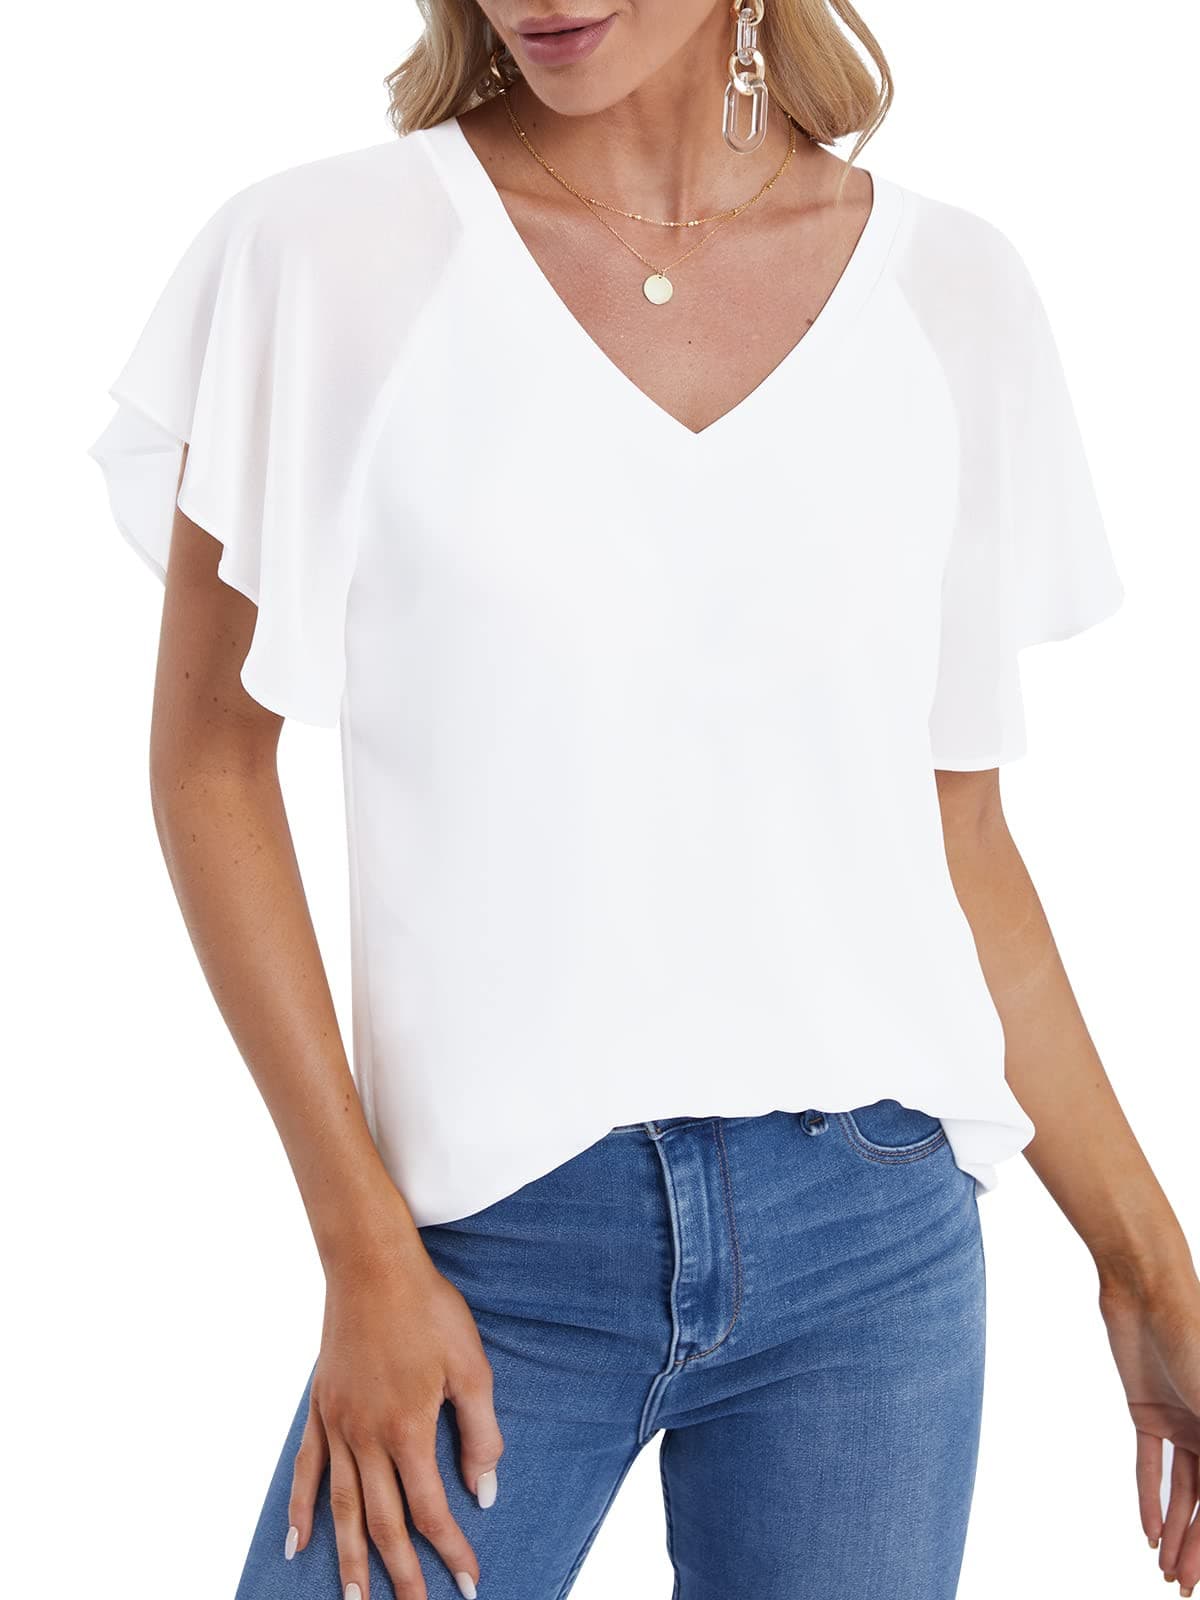 DJT Flare Ruffle White Womens Summer Chiffon Tops Casual V Neck Short Sleeve Flowy Top Blouses Shirts